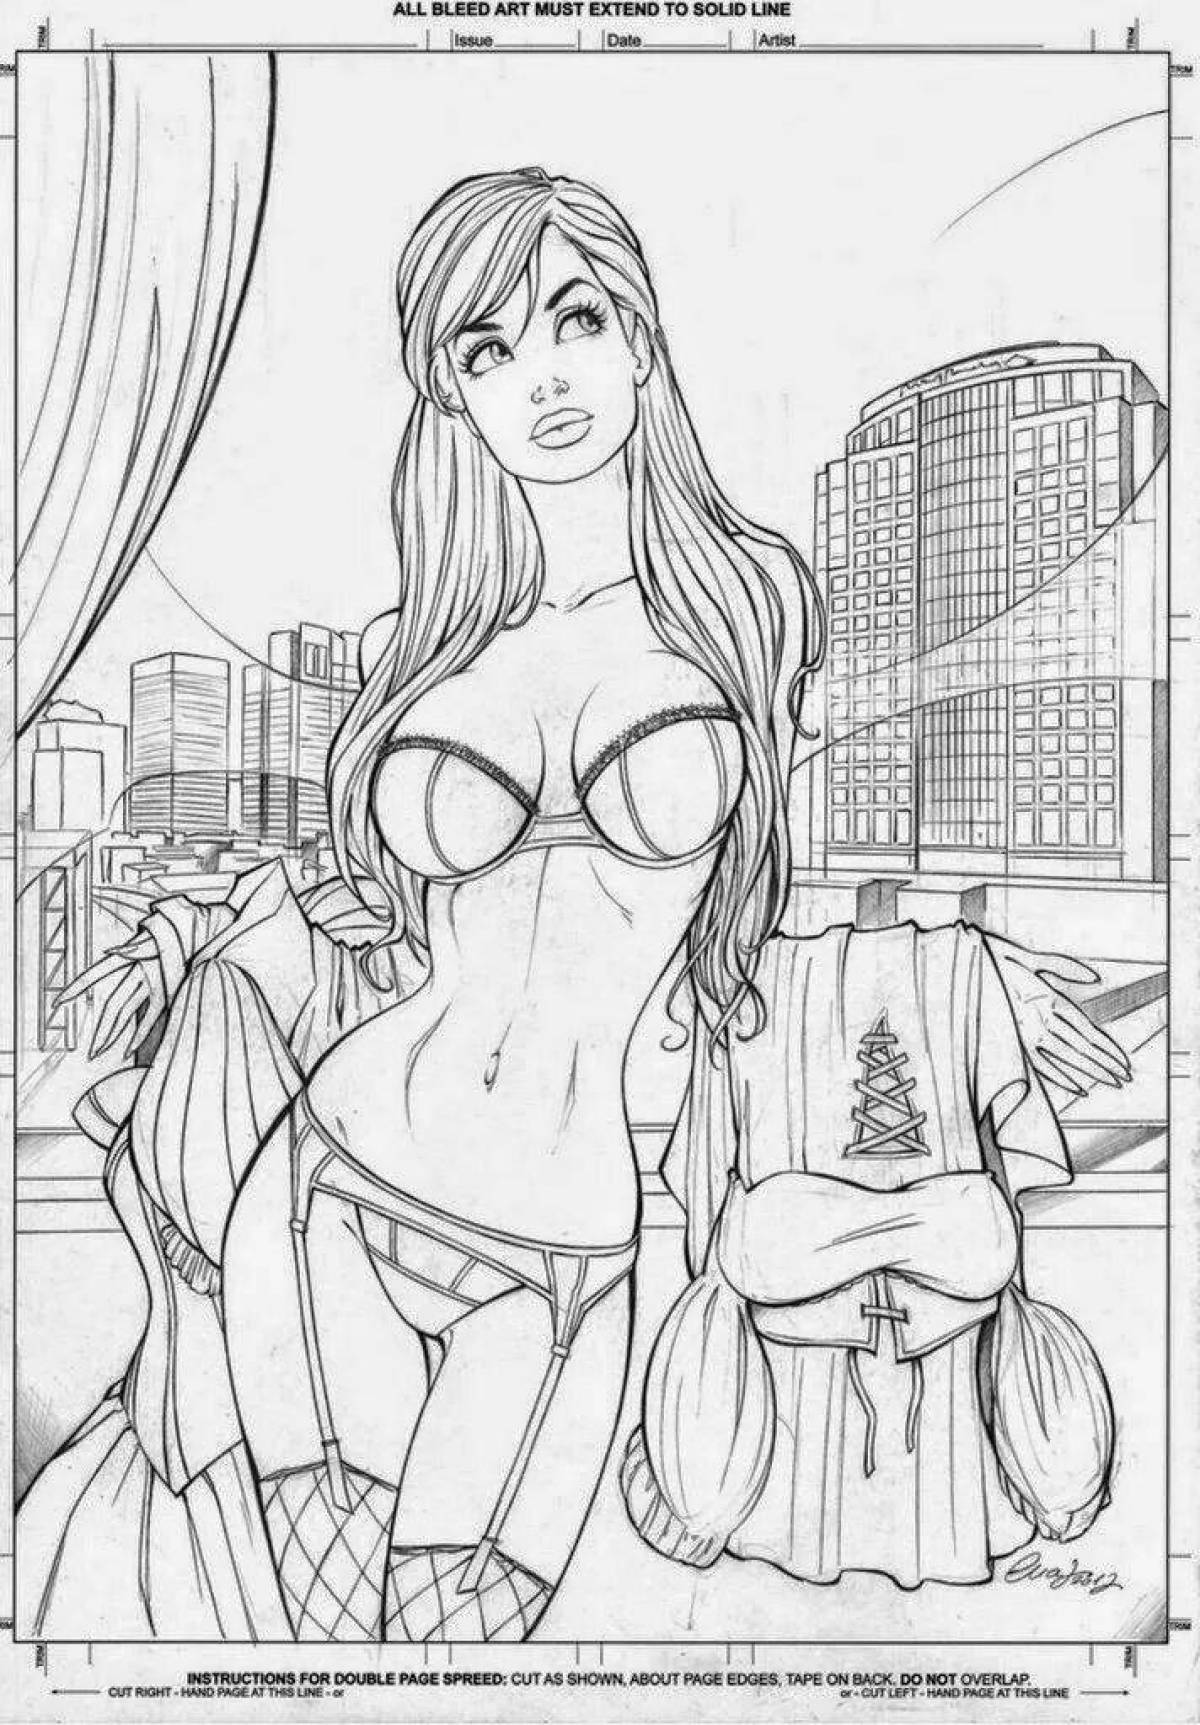 Coloring page charming nude girls